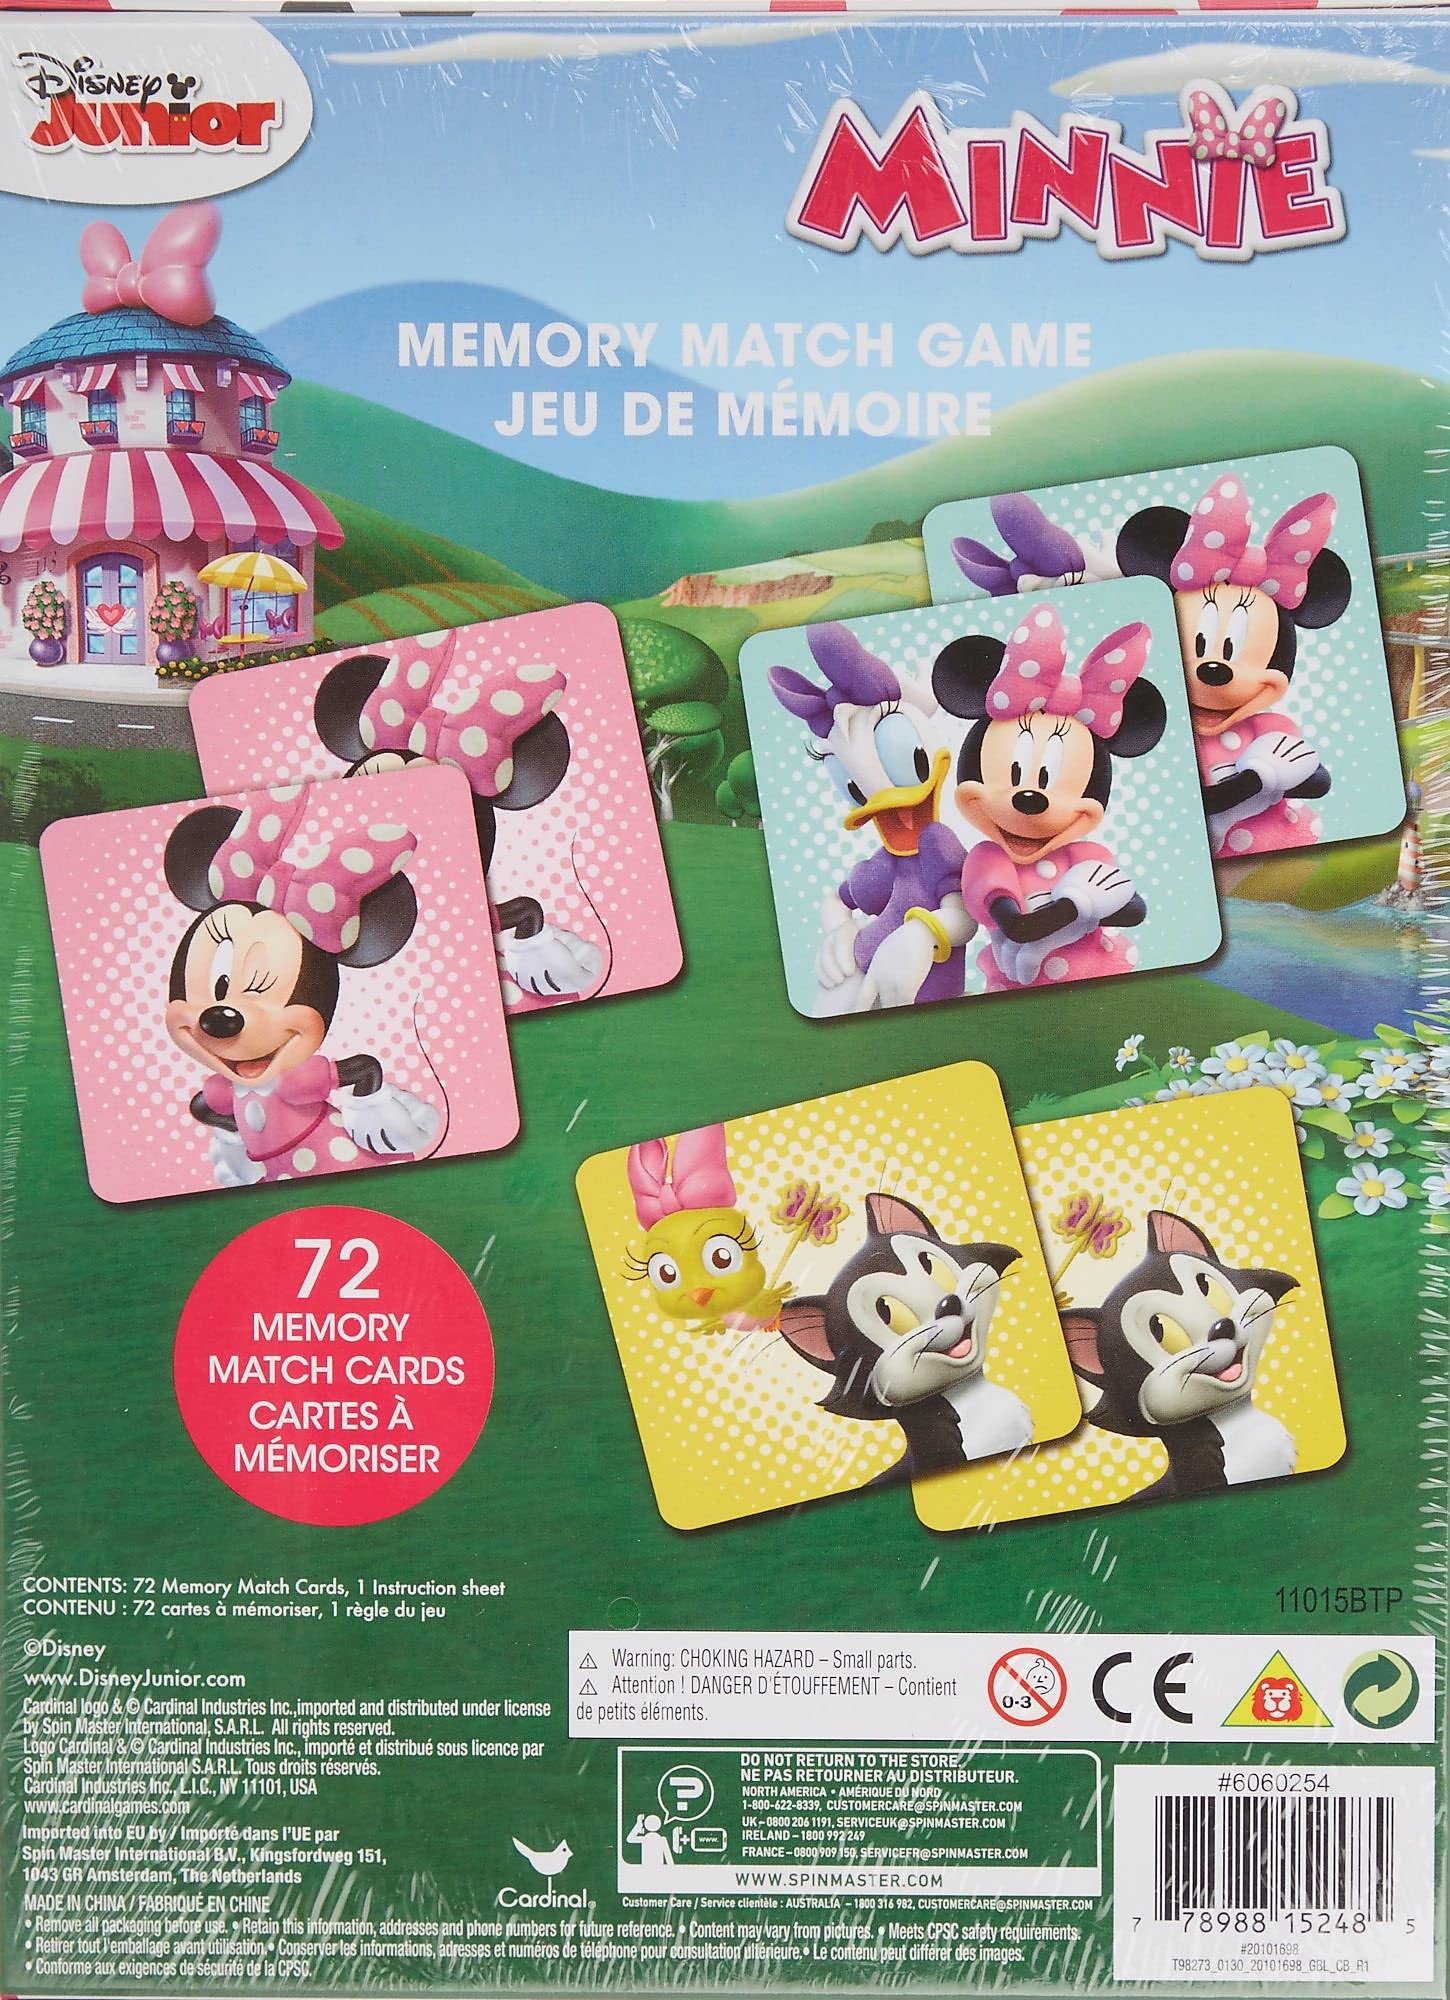 Disney Minnie Mouse Memory Match Game - Pictures Game of 72 Memory Cards with Minnie & Daisy, Concentration & Educational Matching Game for Kids - Colorful Memory Card Game for Kids Age 3 & Up